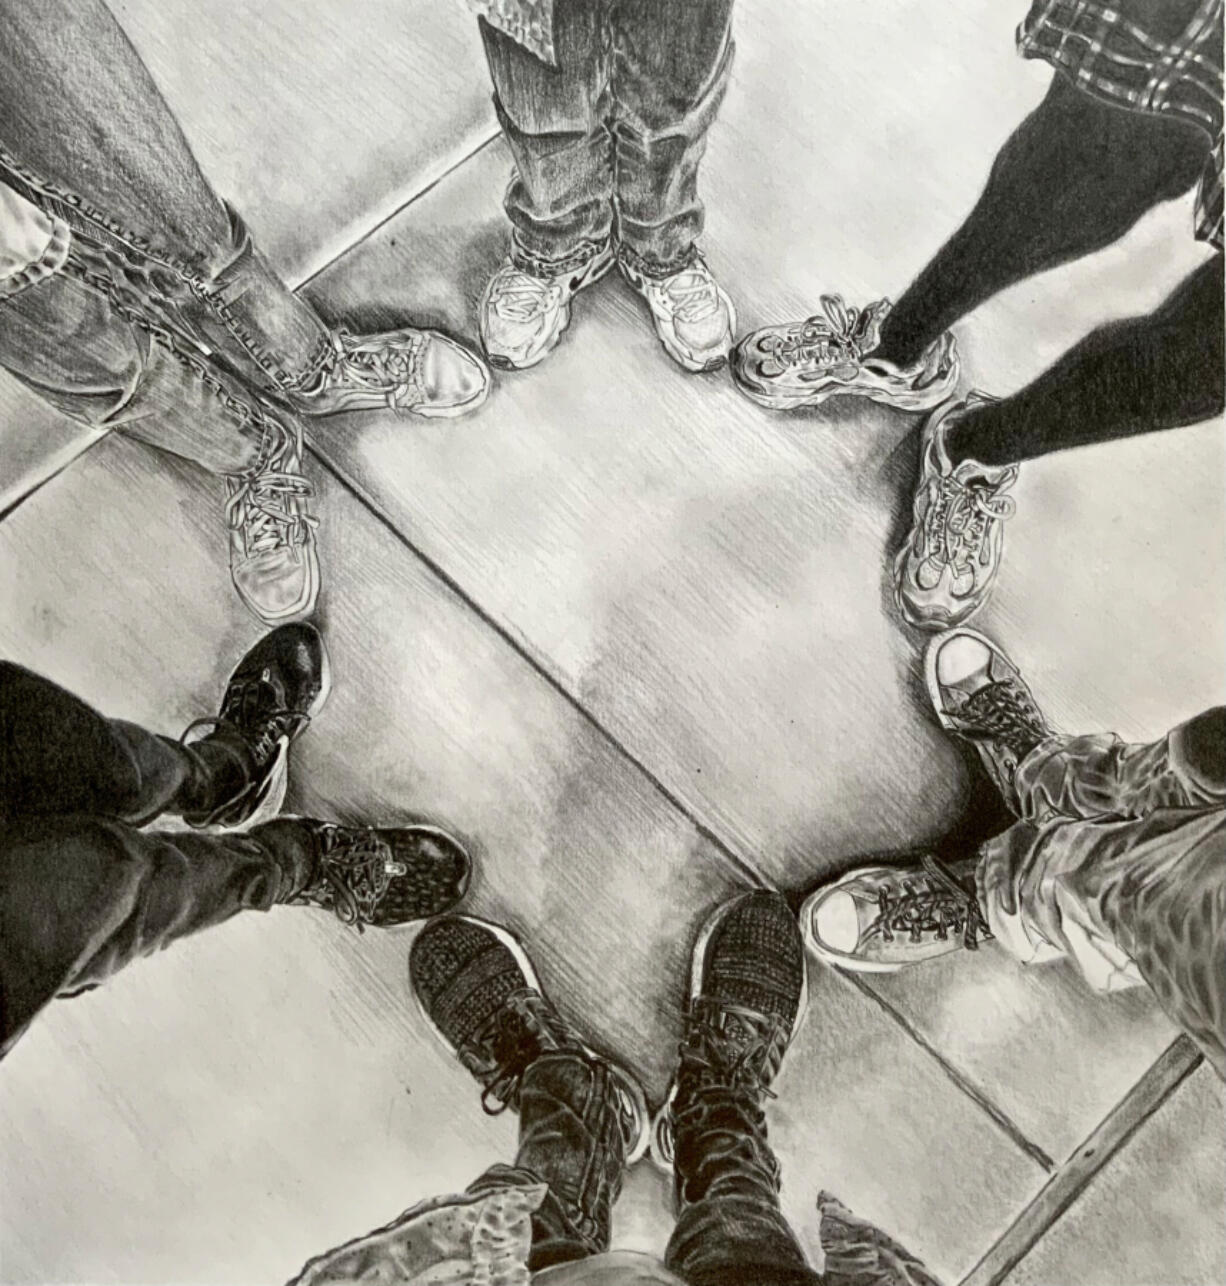 Hannah Kim, from Vancouver's Medallion Art School recently won the 2022 Southwest Washington Congressional Art Competition for her work 555 Days.